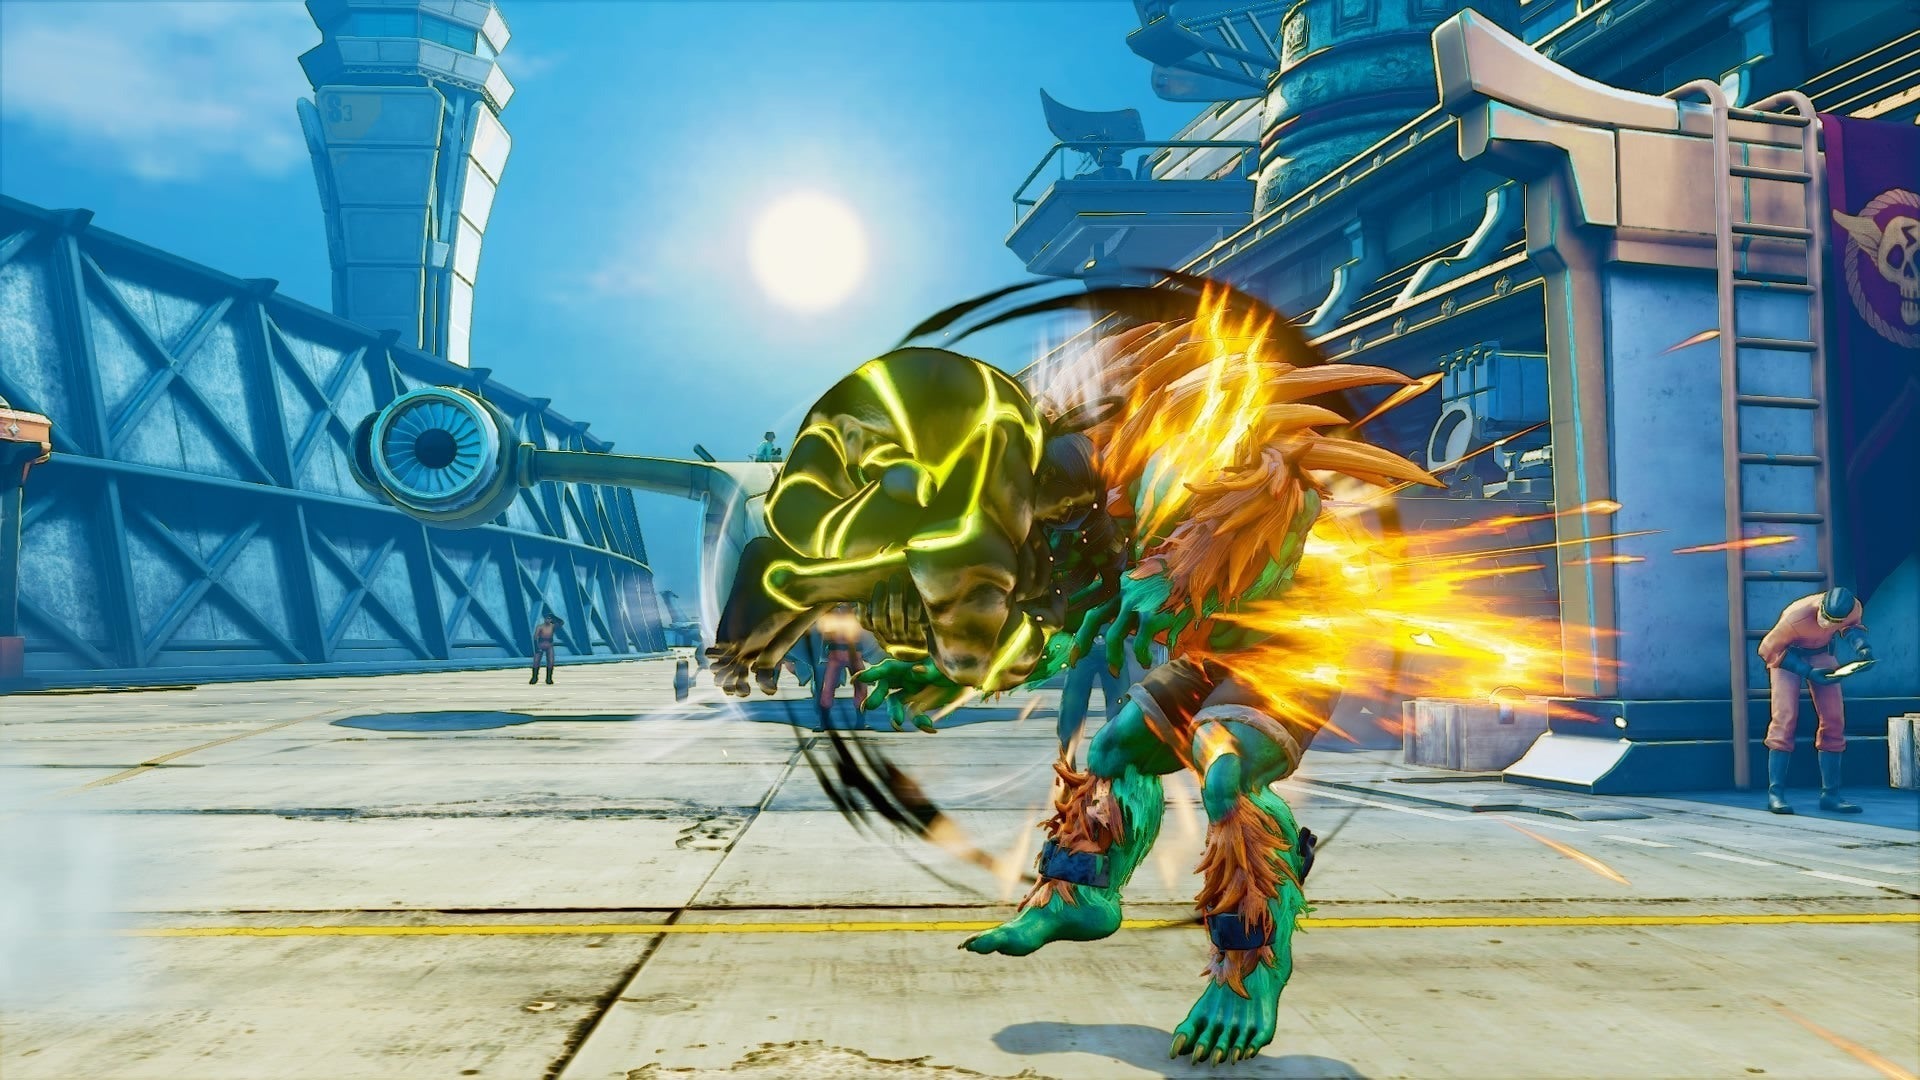 CHARACTER REVEAL - Seth joins the roster as a downloadable character in Street Fighter V. 